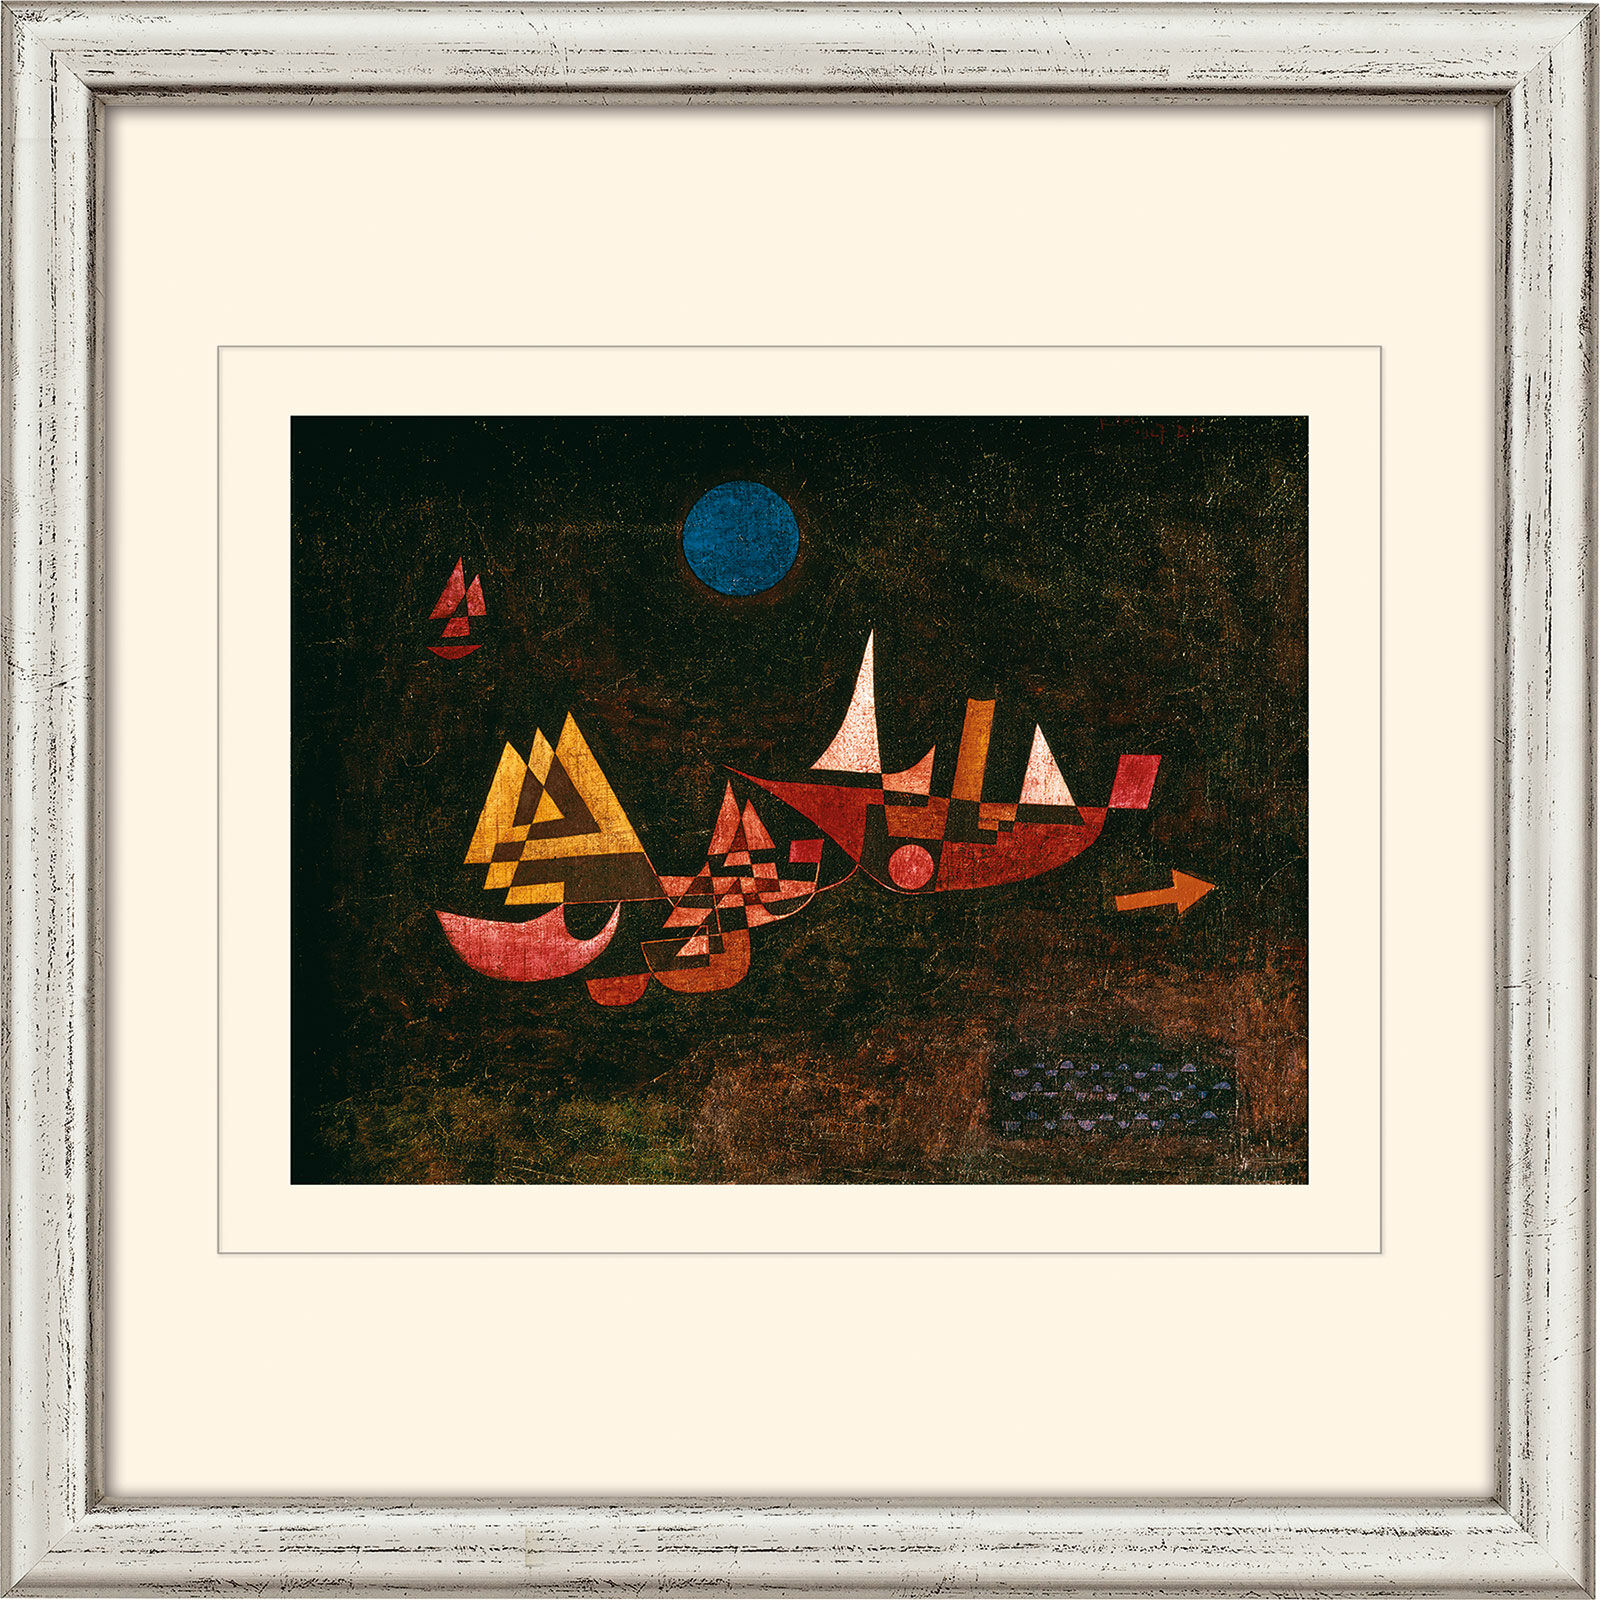 Picture "Departure of the Ships" (1927), framed by Paul Klee